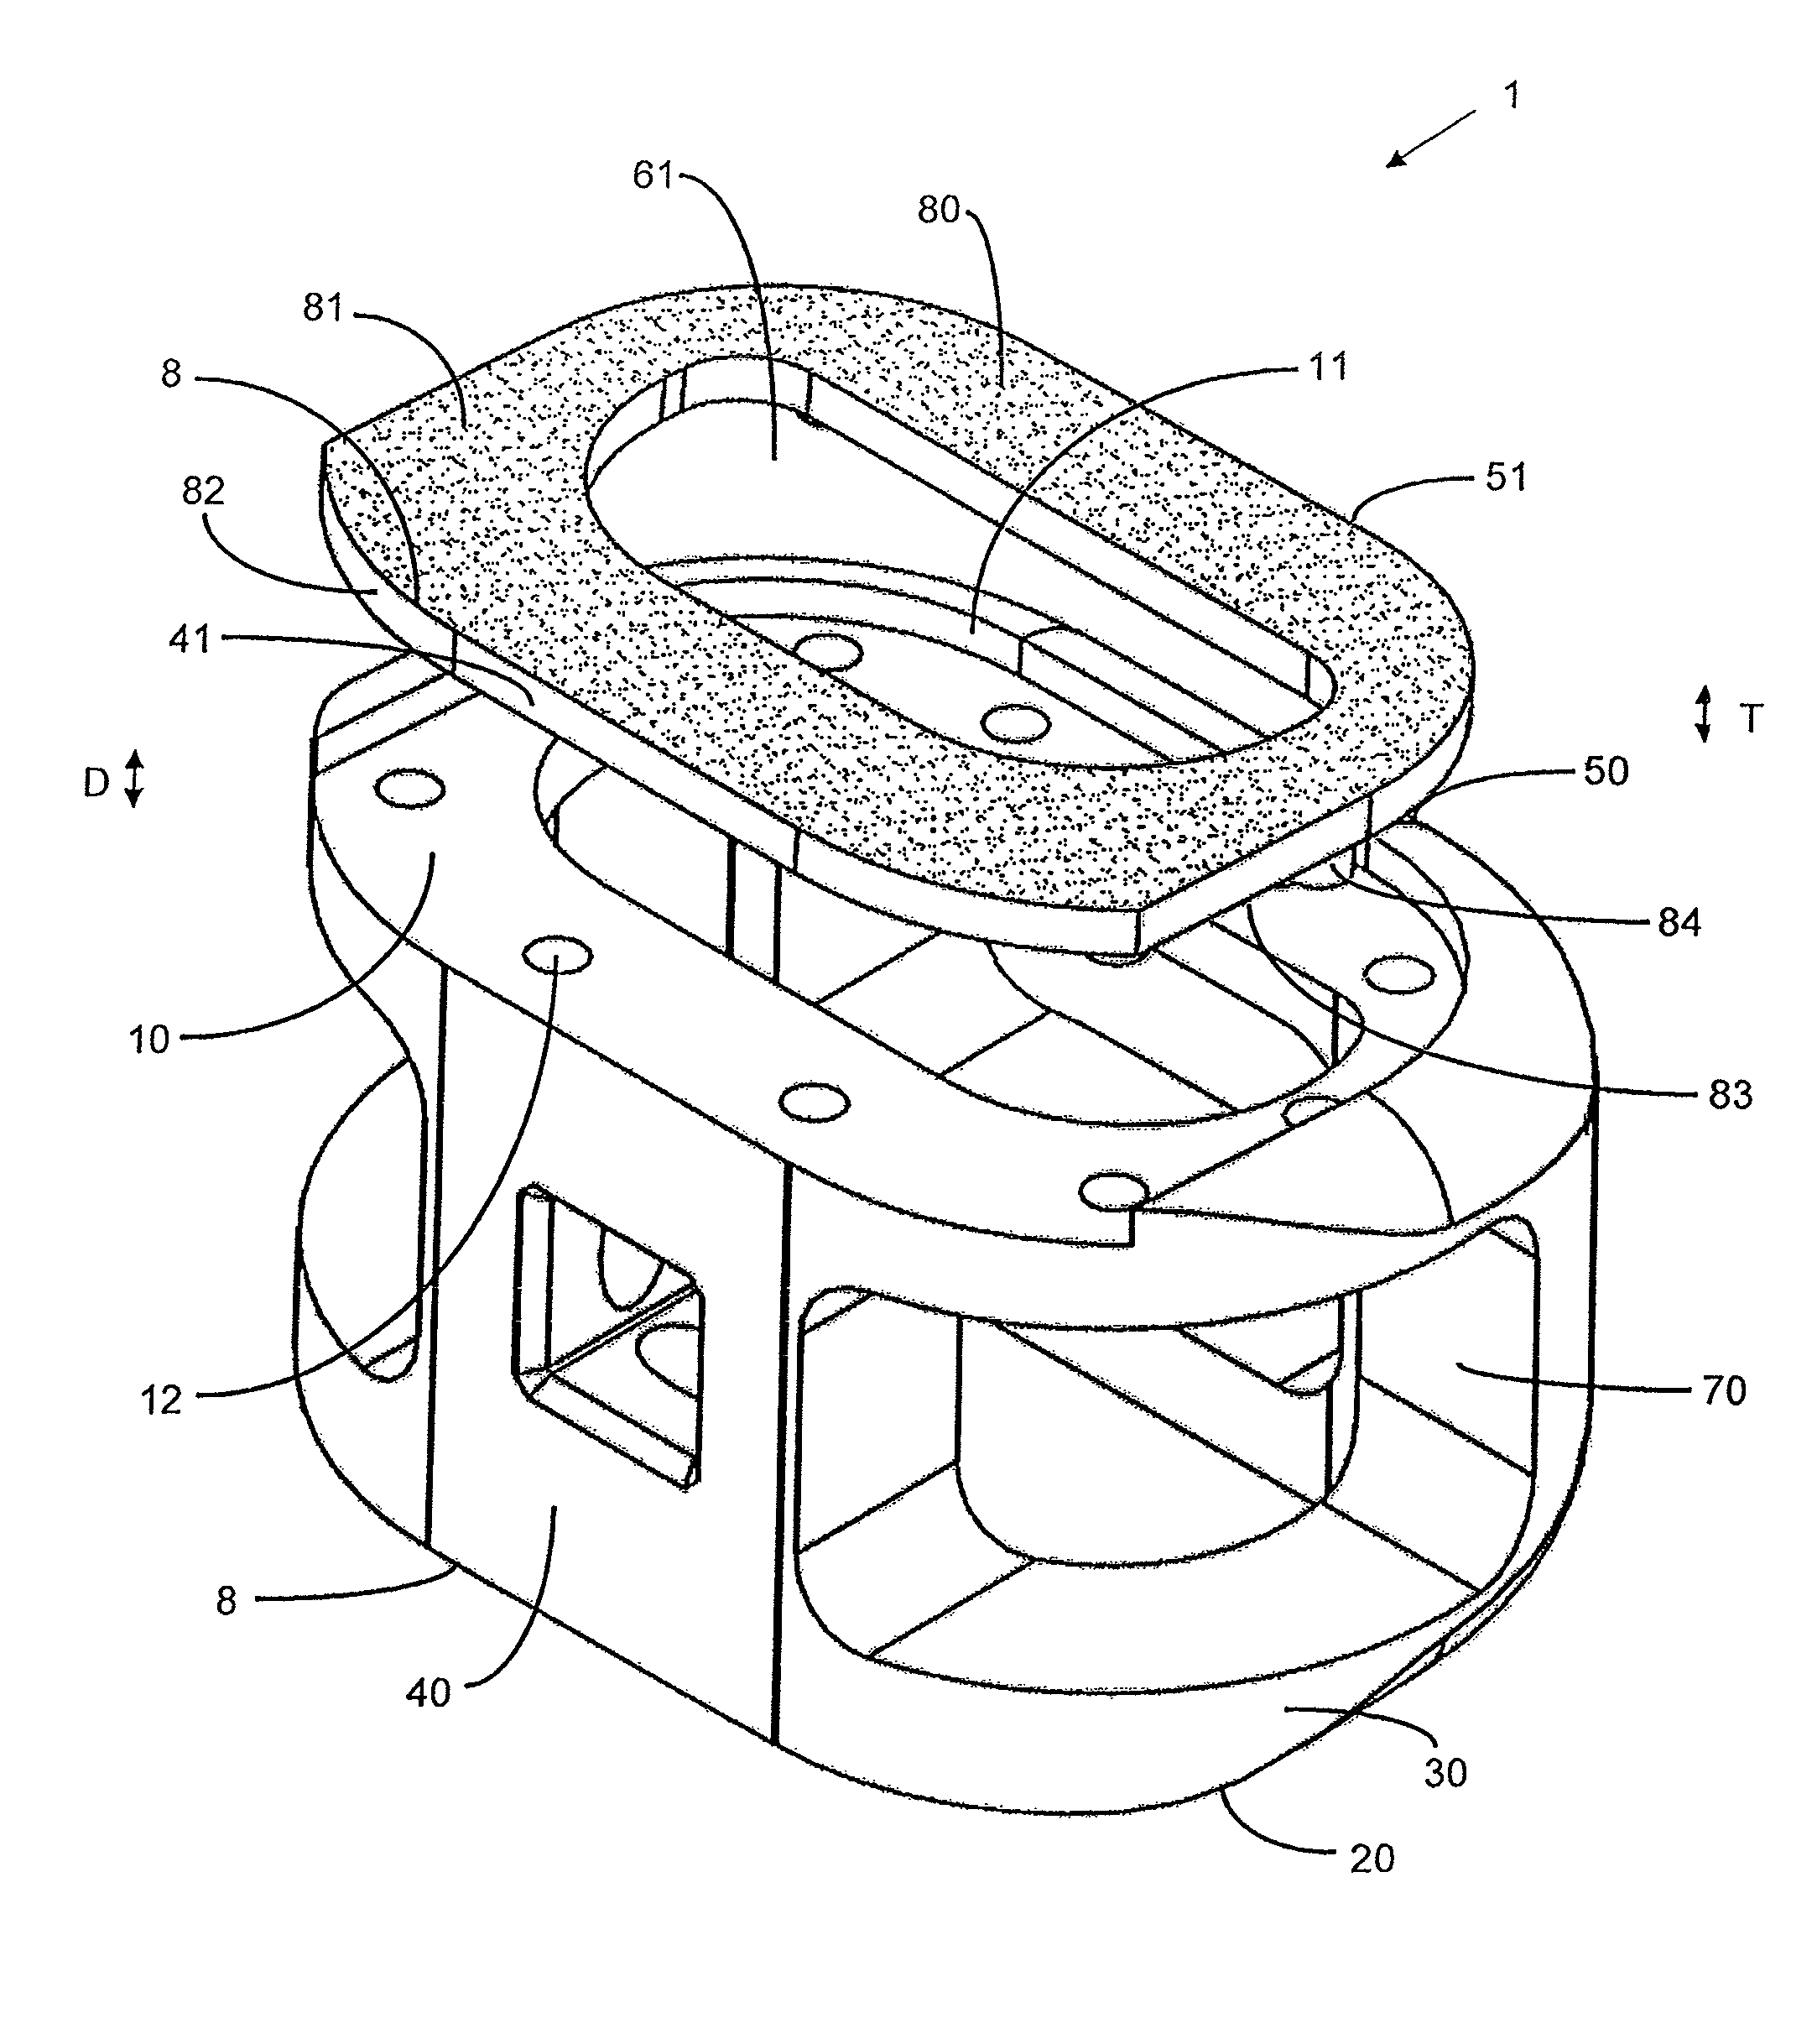 Endplate-preserving spinal implant with an integration plate having durable connectors